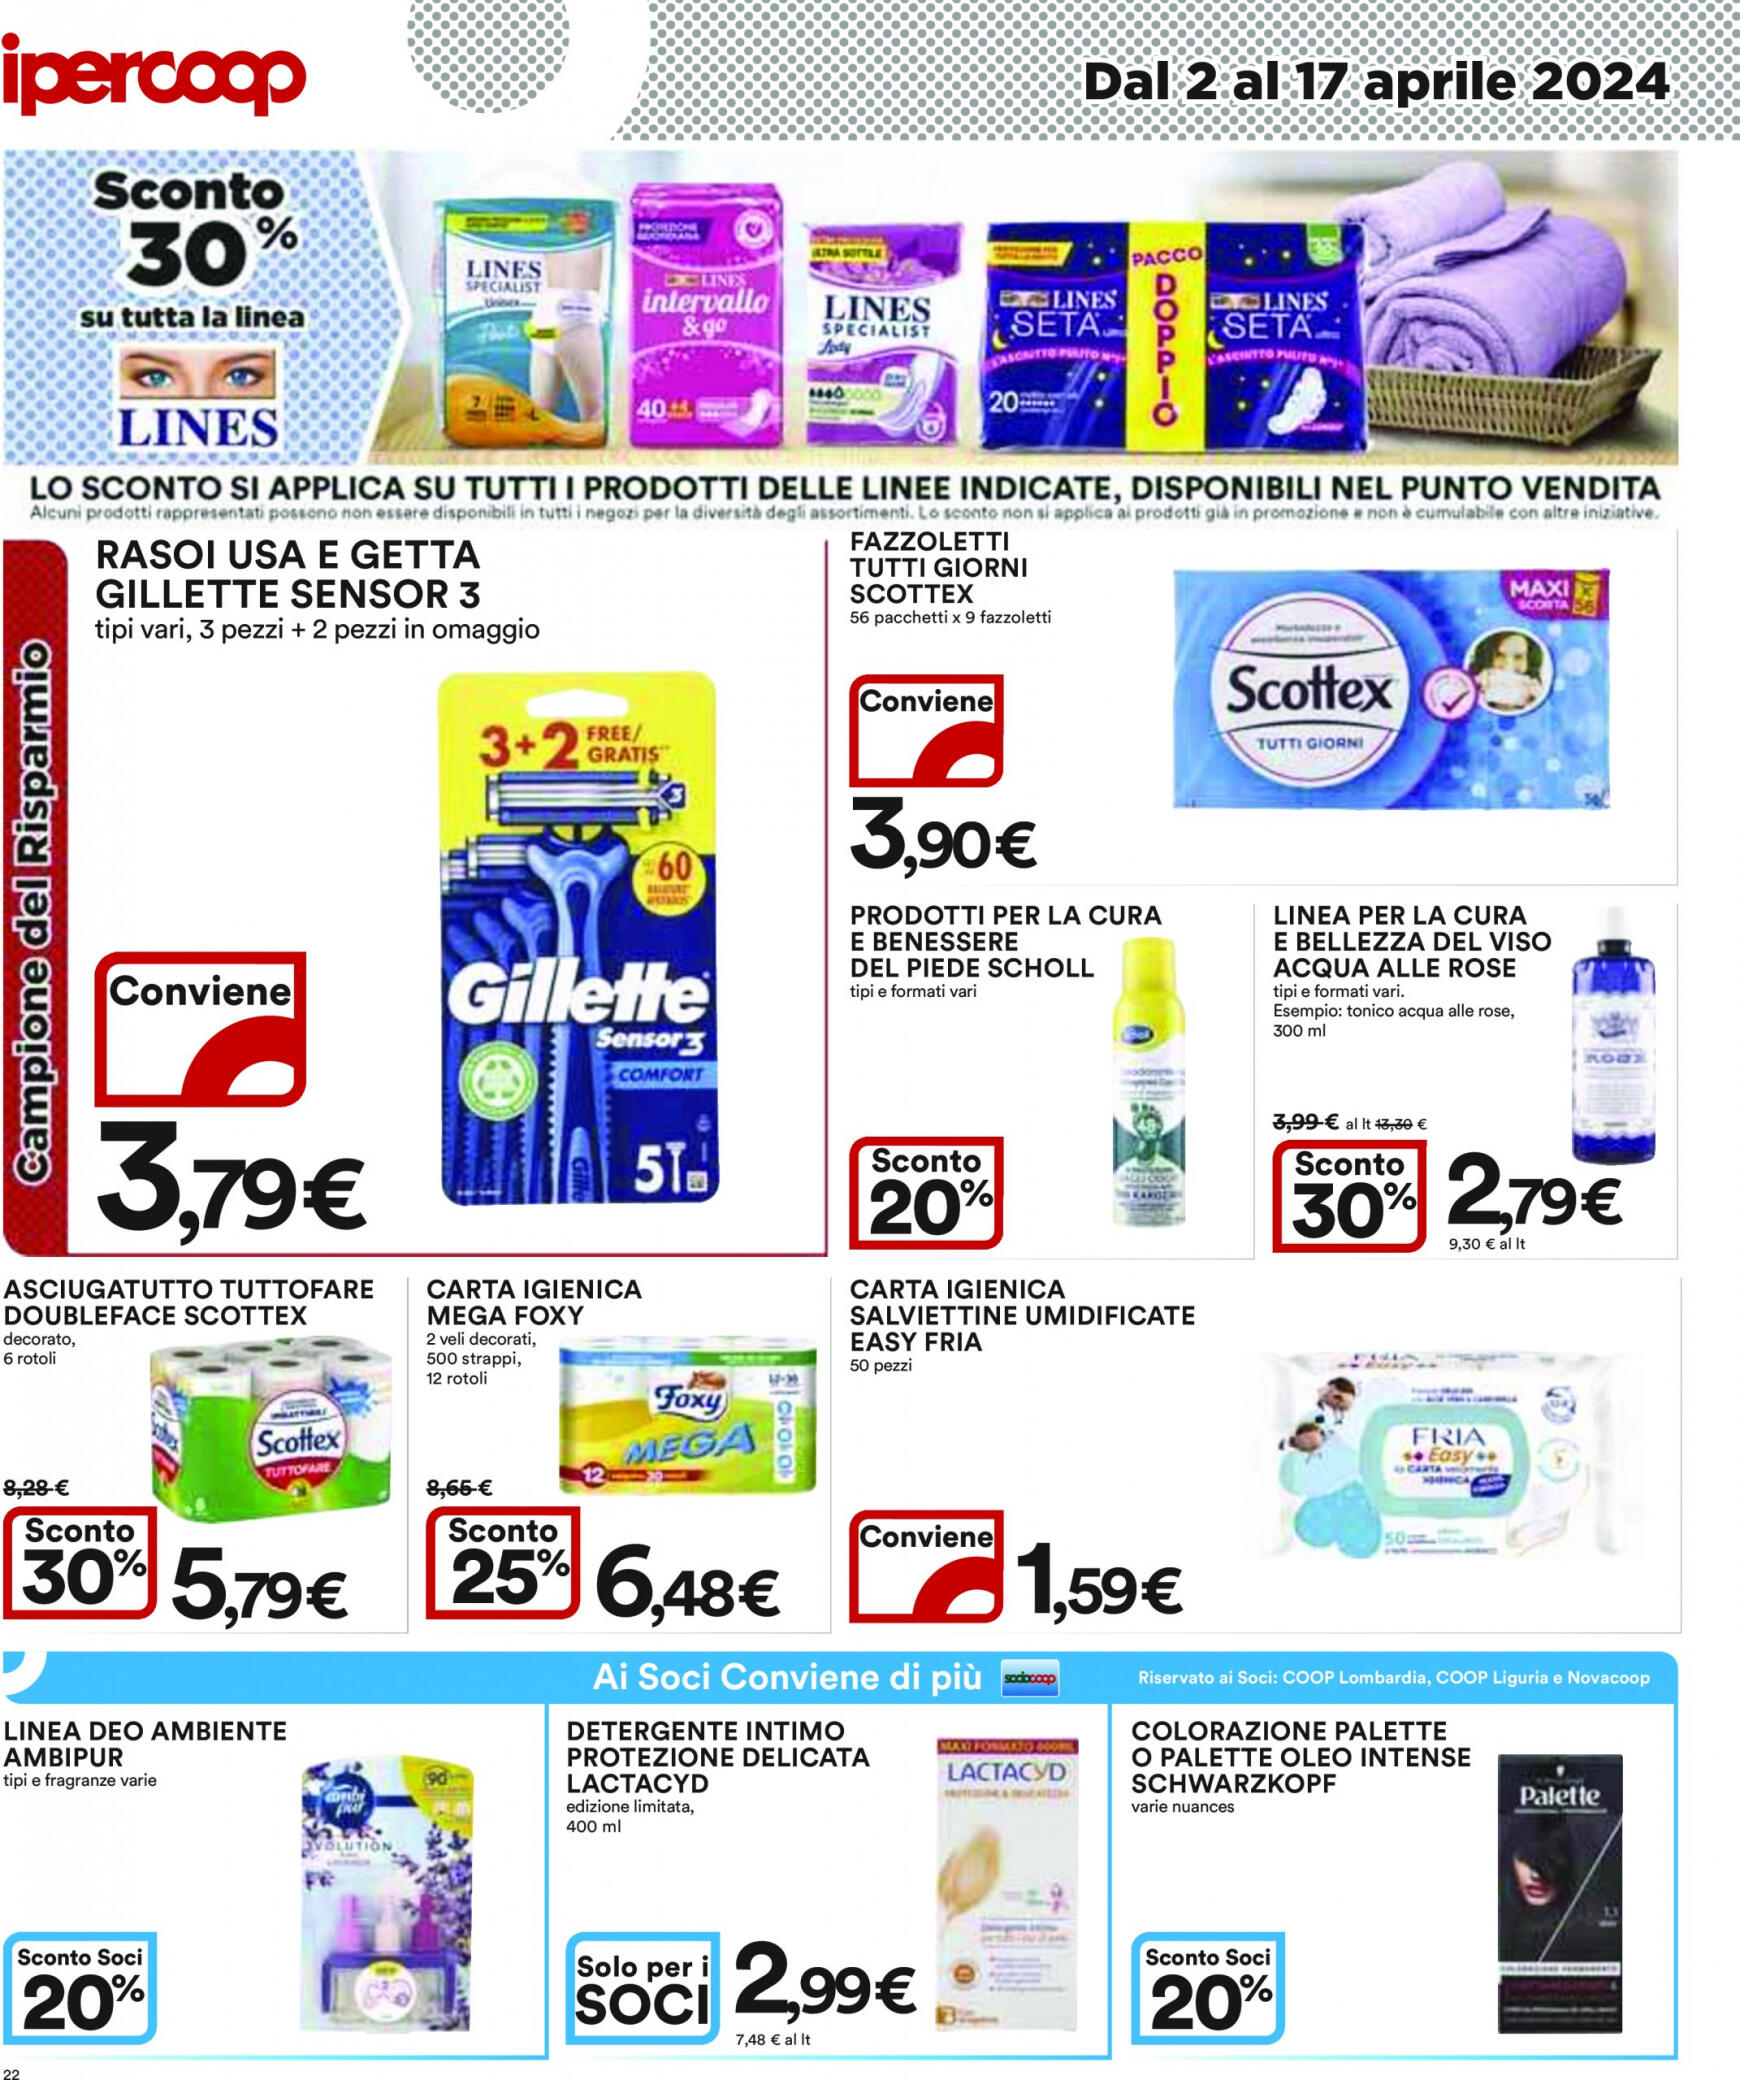 coop - Nuovo volantino Coop 02.04. - 17.04. - page: 22